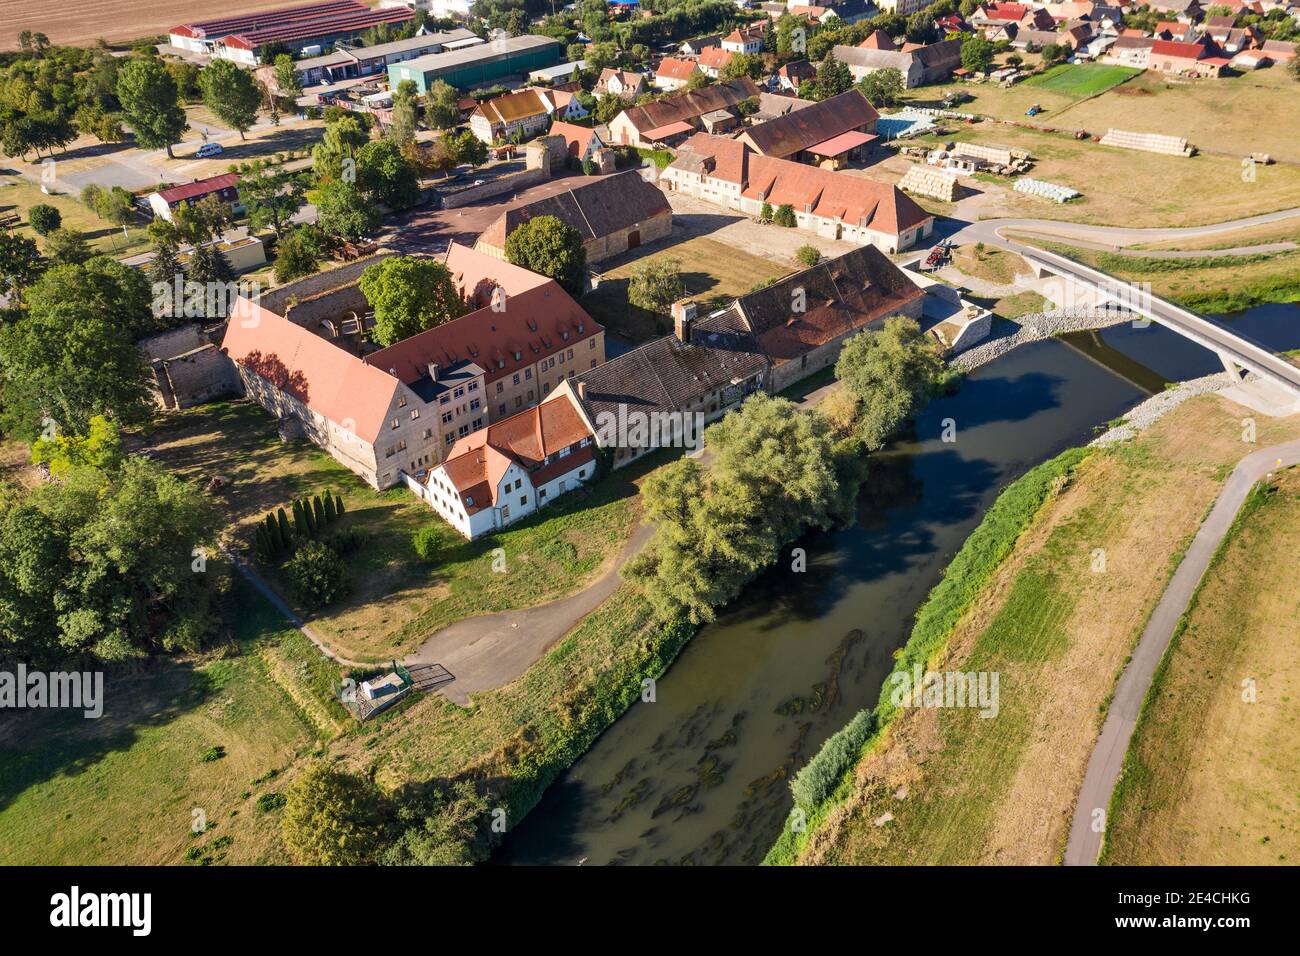 Germany, Saxony-Anhalt, Burgenlandkreis, monastery and imperial palace, Memleben, town, museum, ruin, river, aerial view Stock Photo